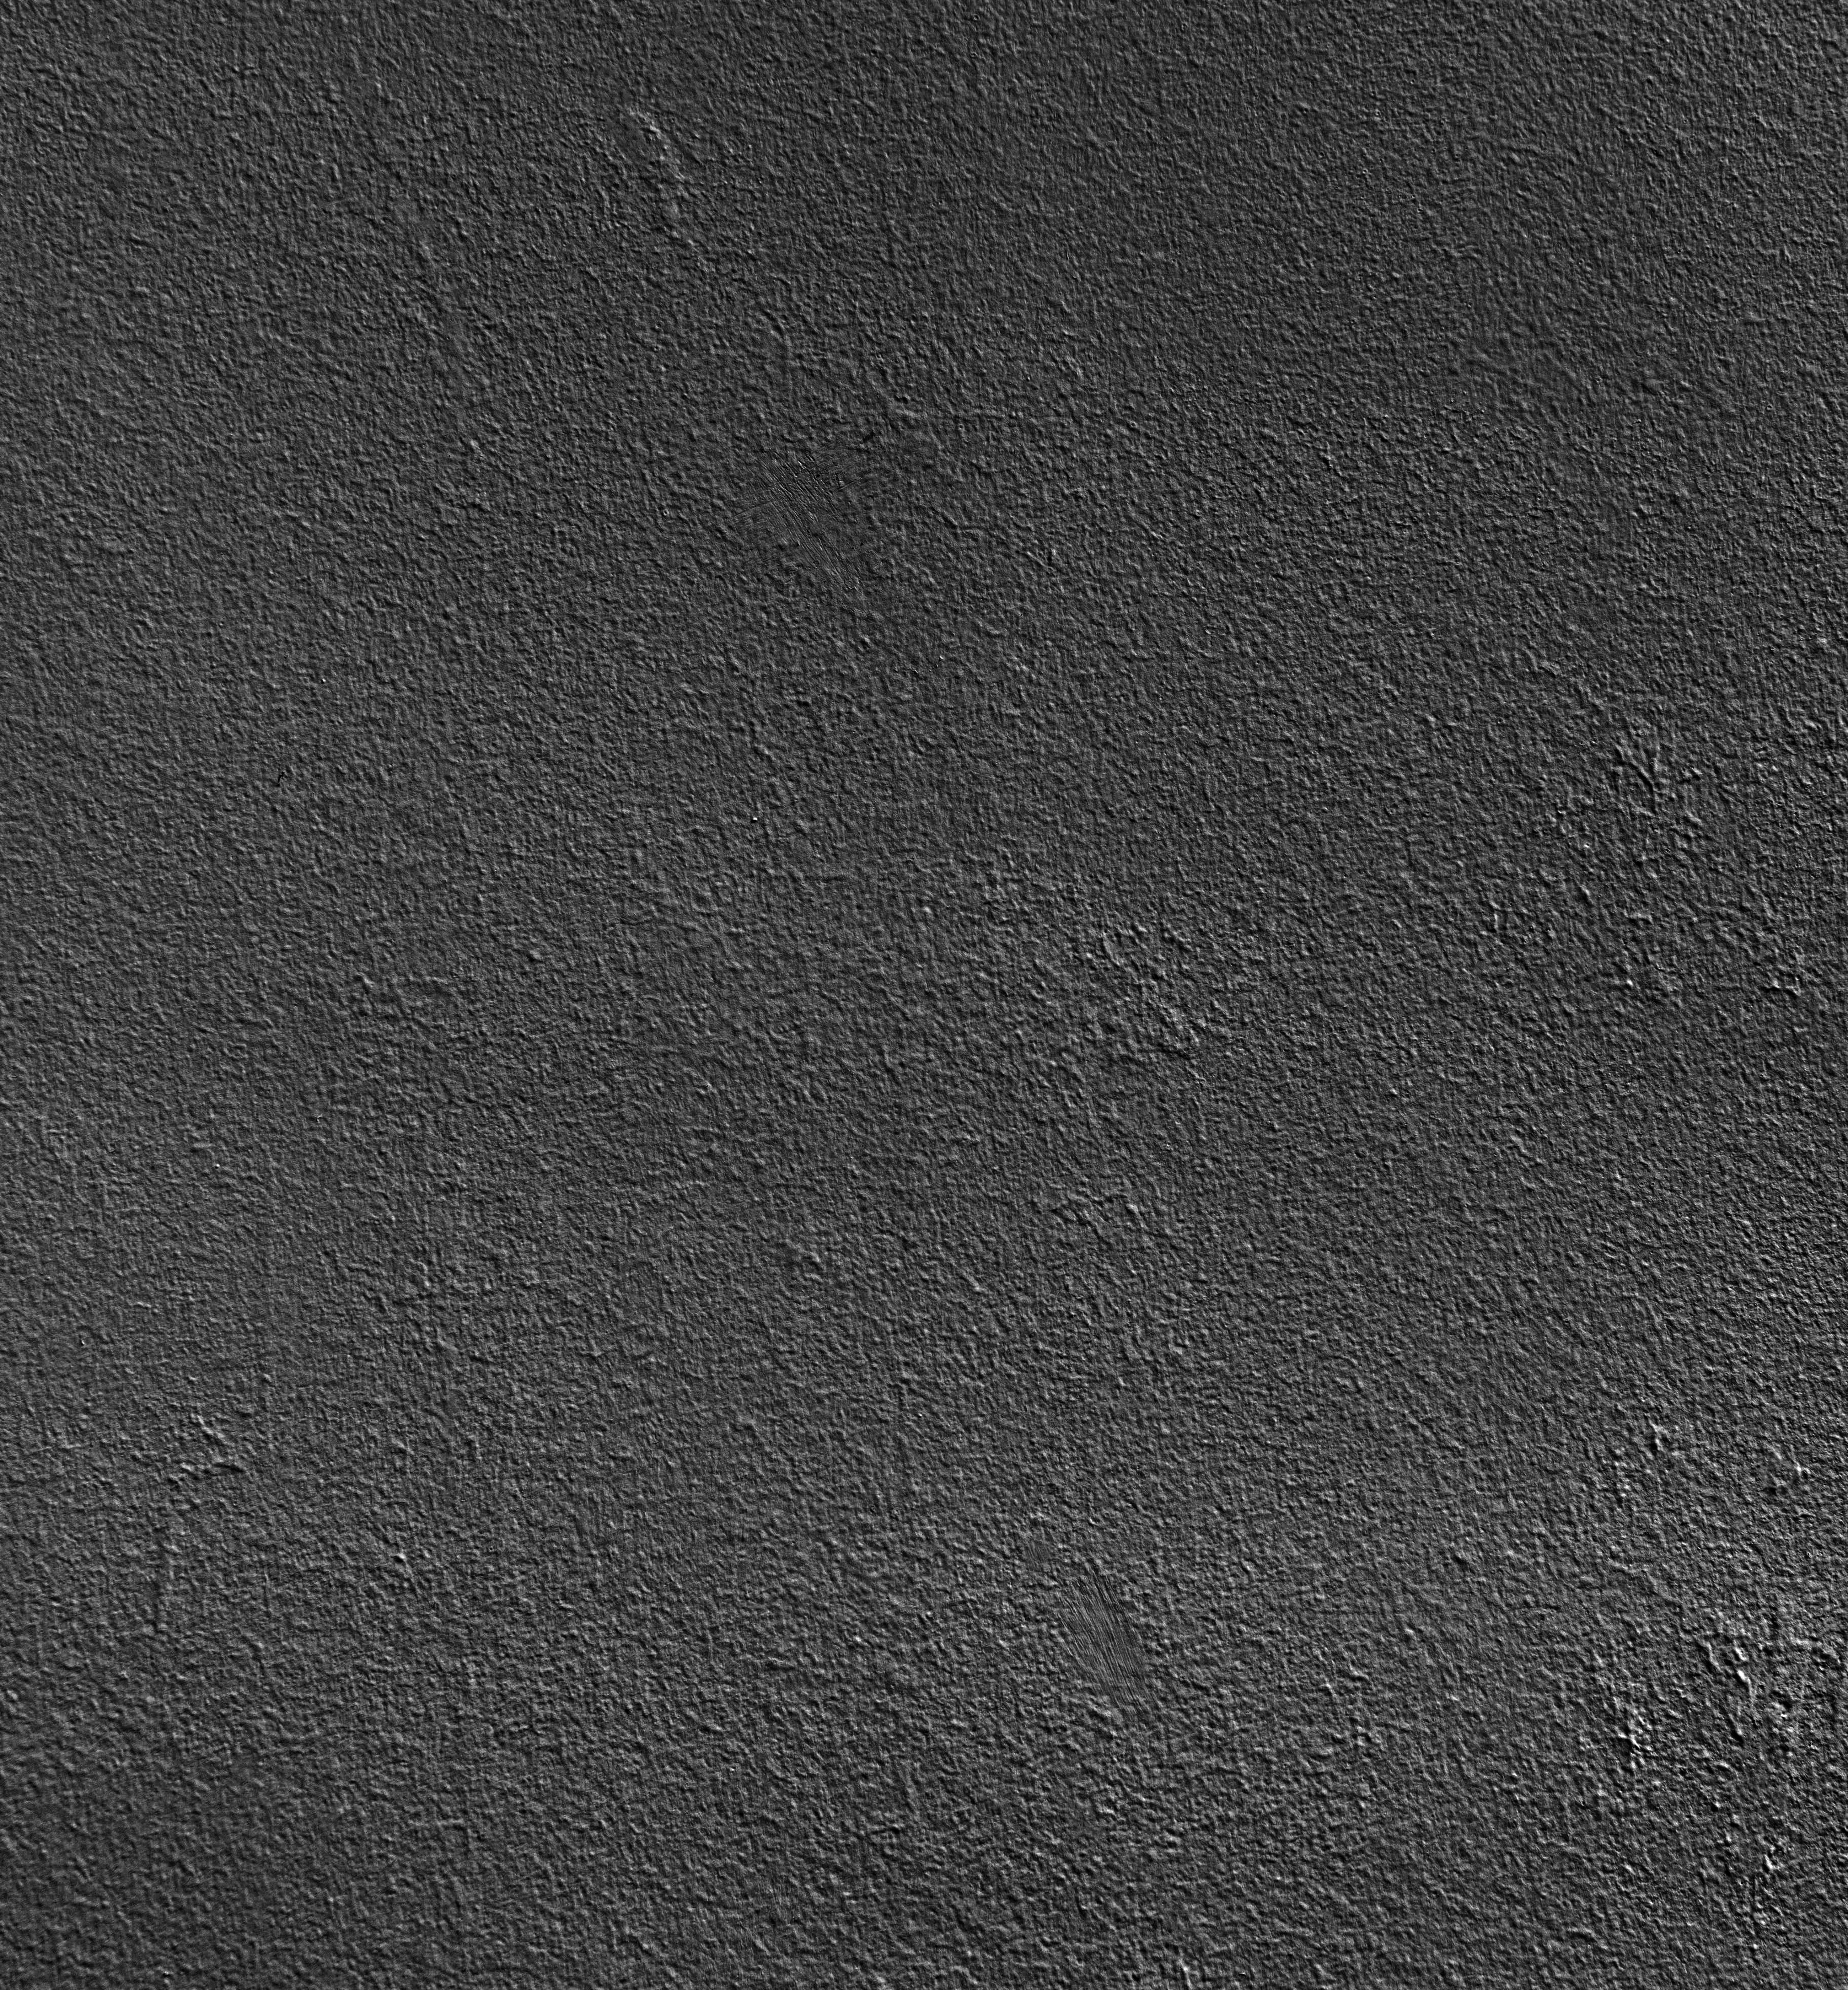 surface, texture, textures, wall, grey, rough, rugged